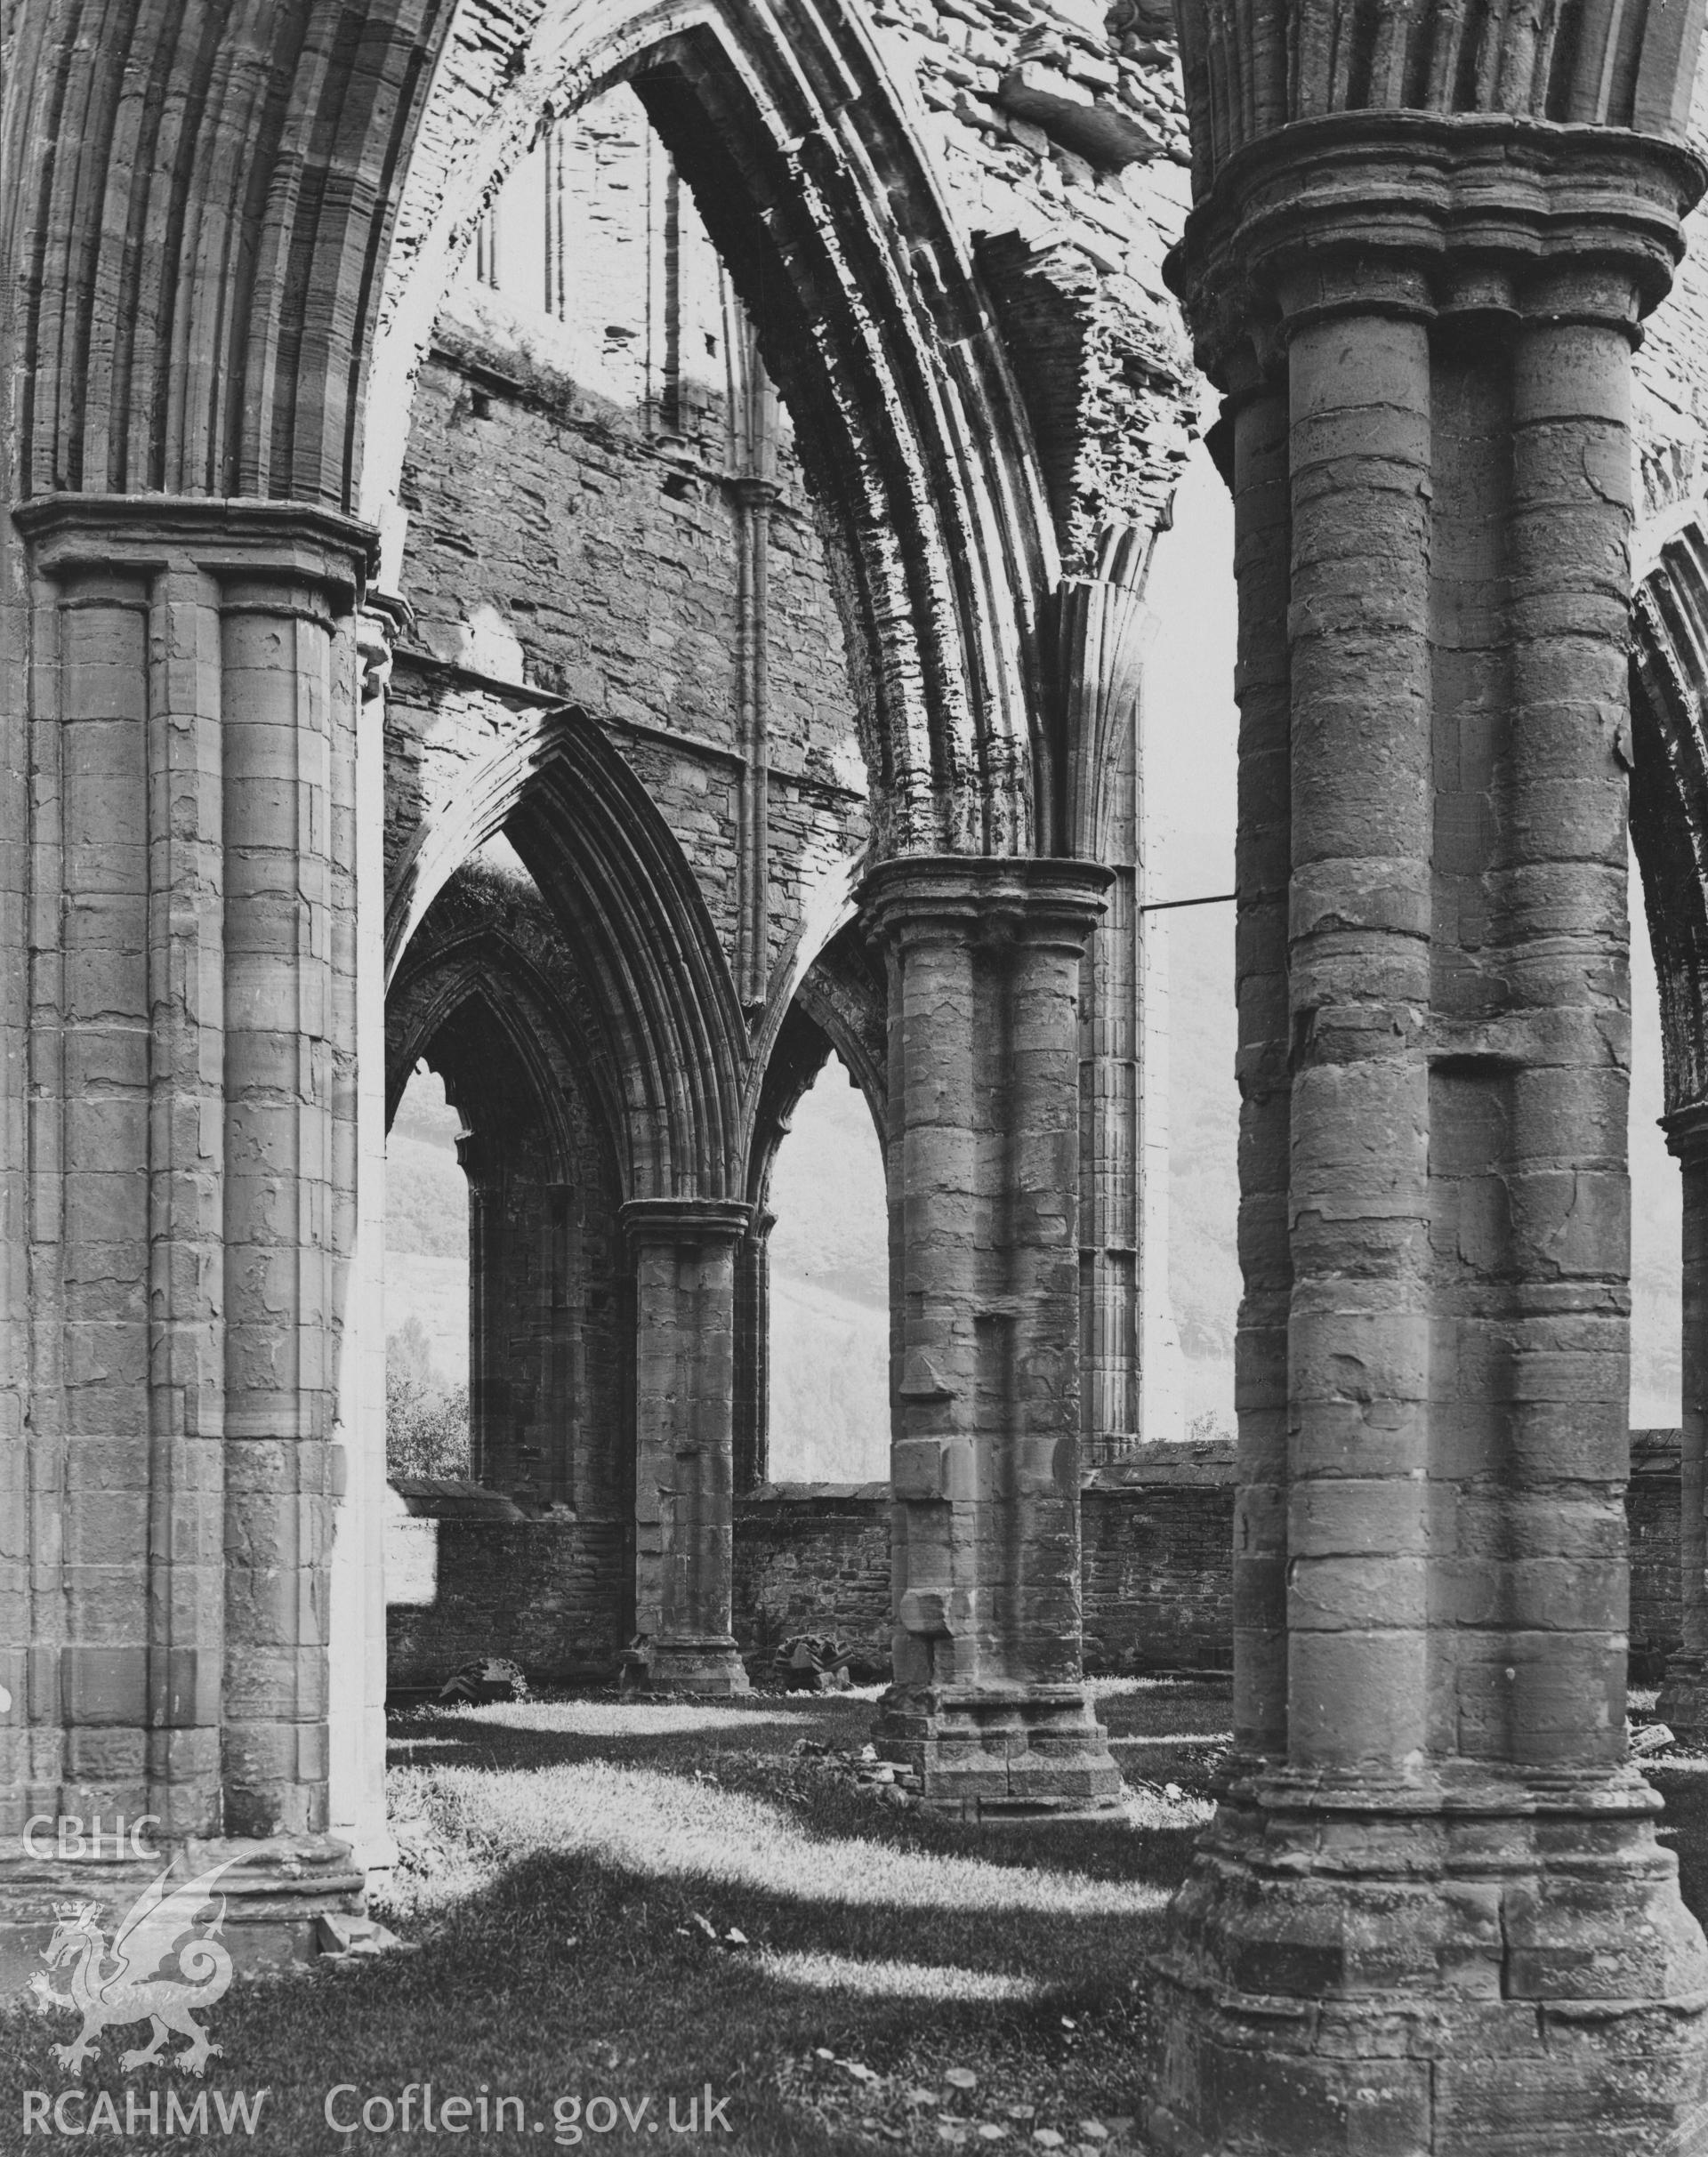 Digital copy of an early National Buildings Record photograph showing an interior view of the Presbytery at Tintern Abbey looking north-east.